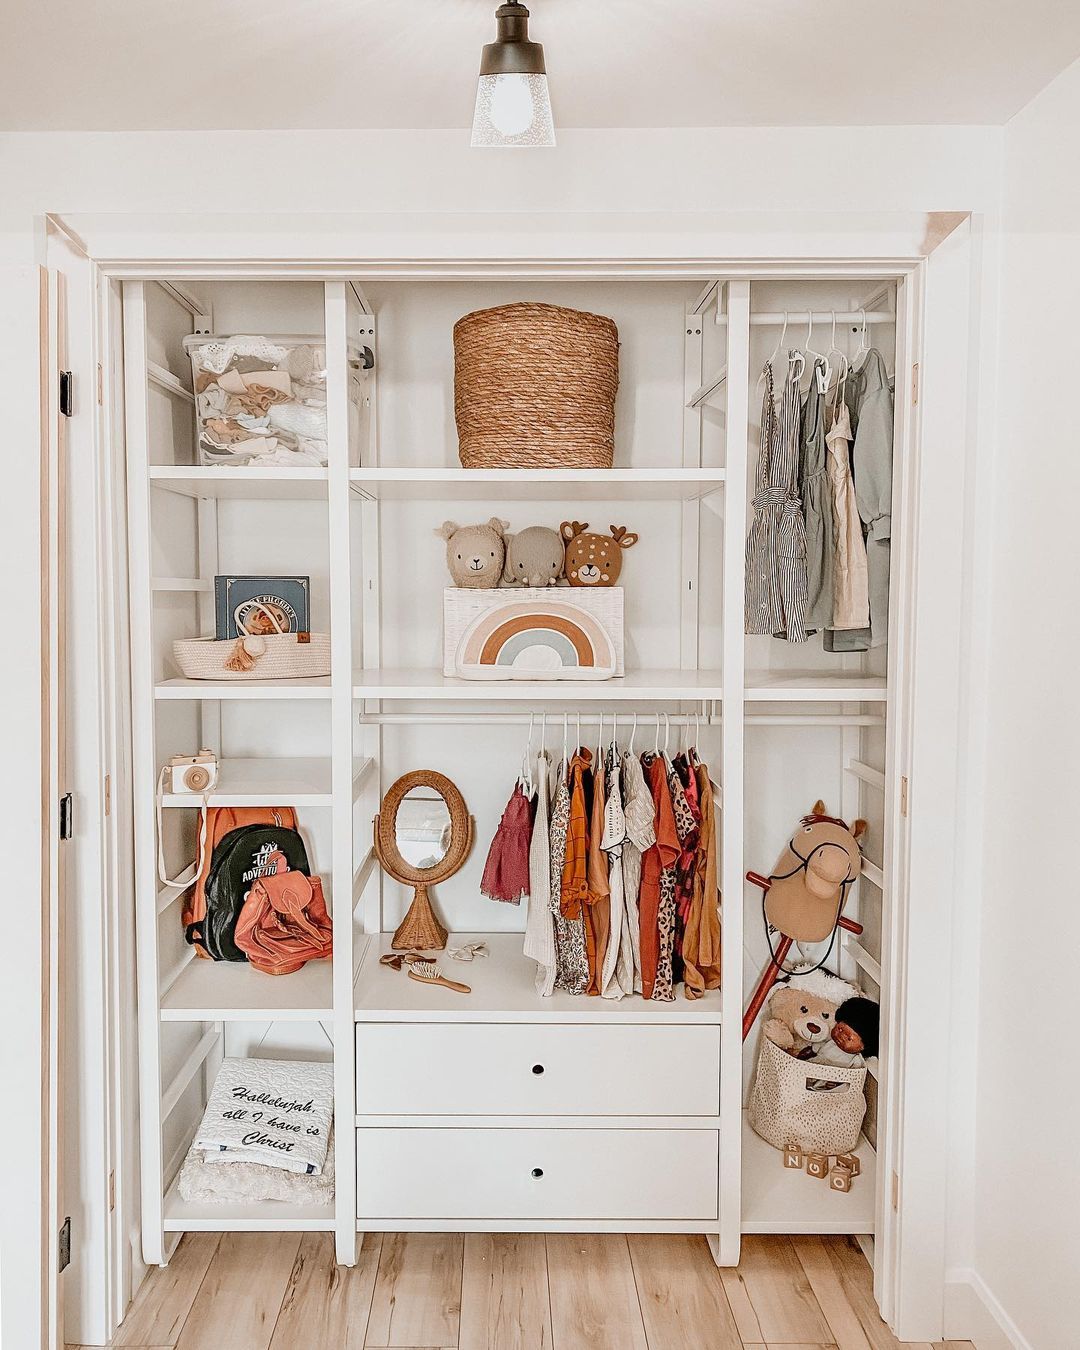 10 Ikea Closet Ideas For Kids That Are Just Plain Fun | Hunker Inside Childrens Wardrobes With Drawers And Shelves (View 11 of 15)